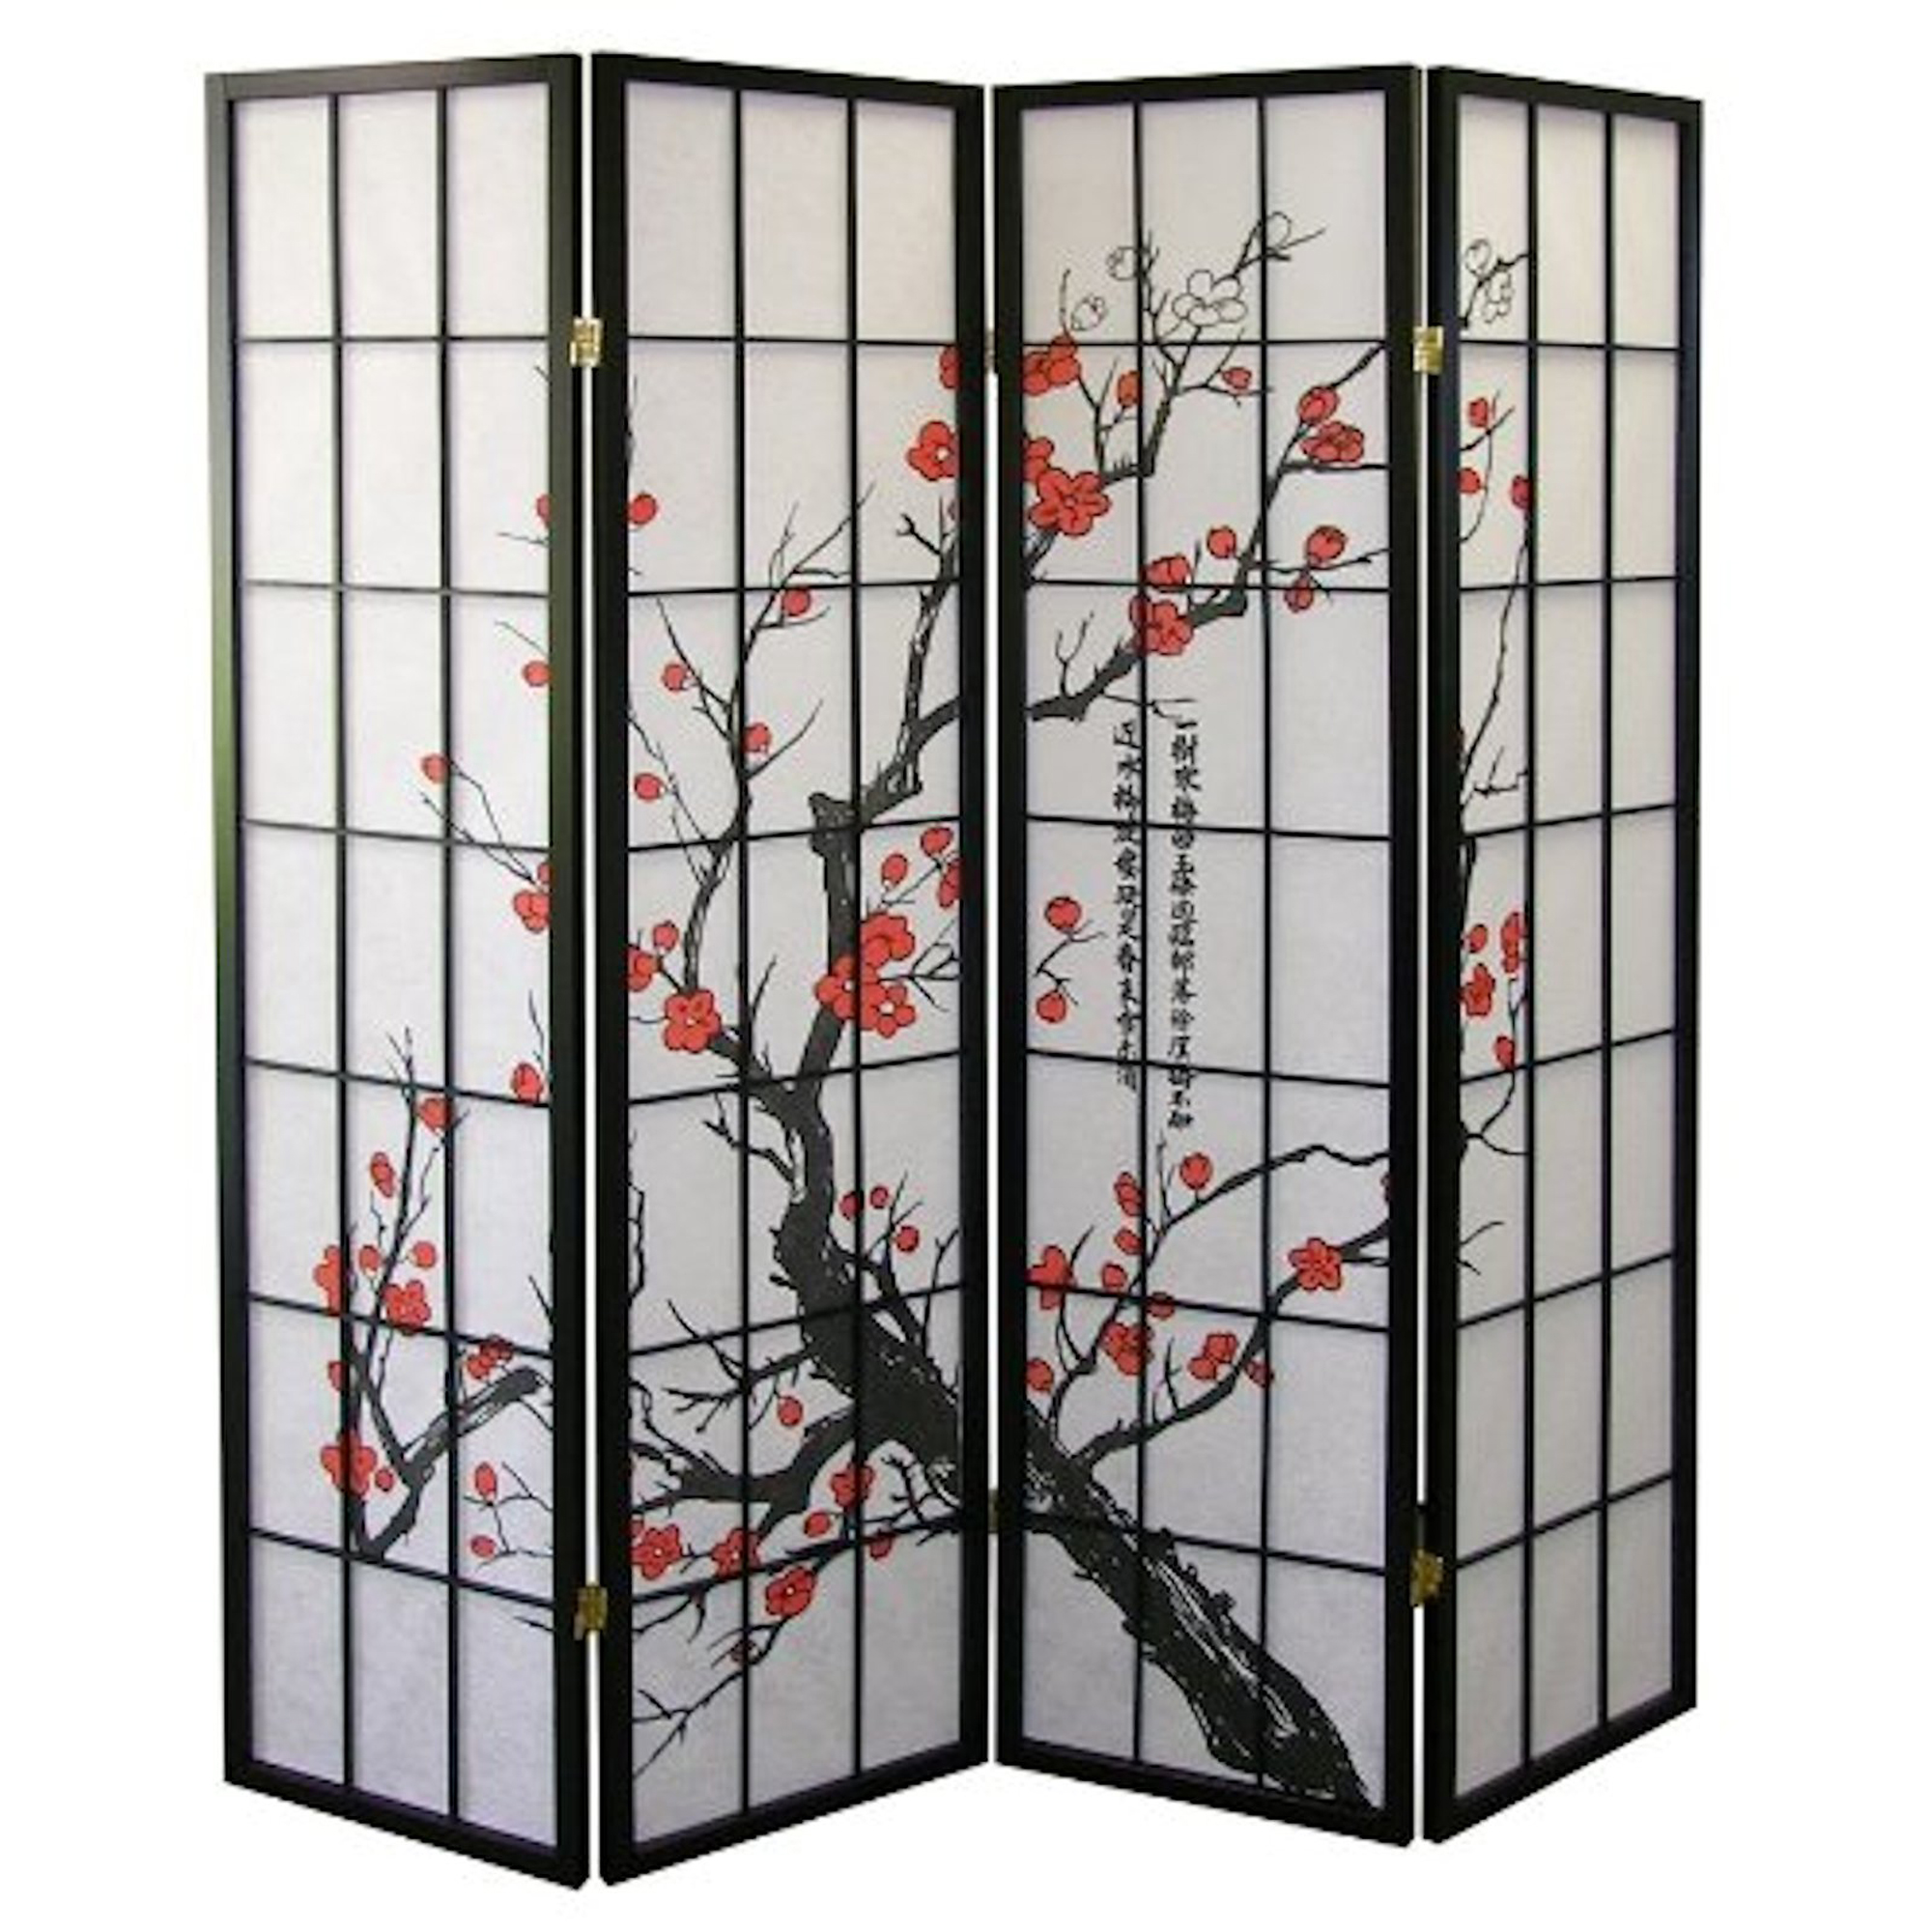 Select Plum Blossom Color and Panel 3 to 8 Room Divider Black, 3